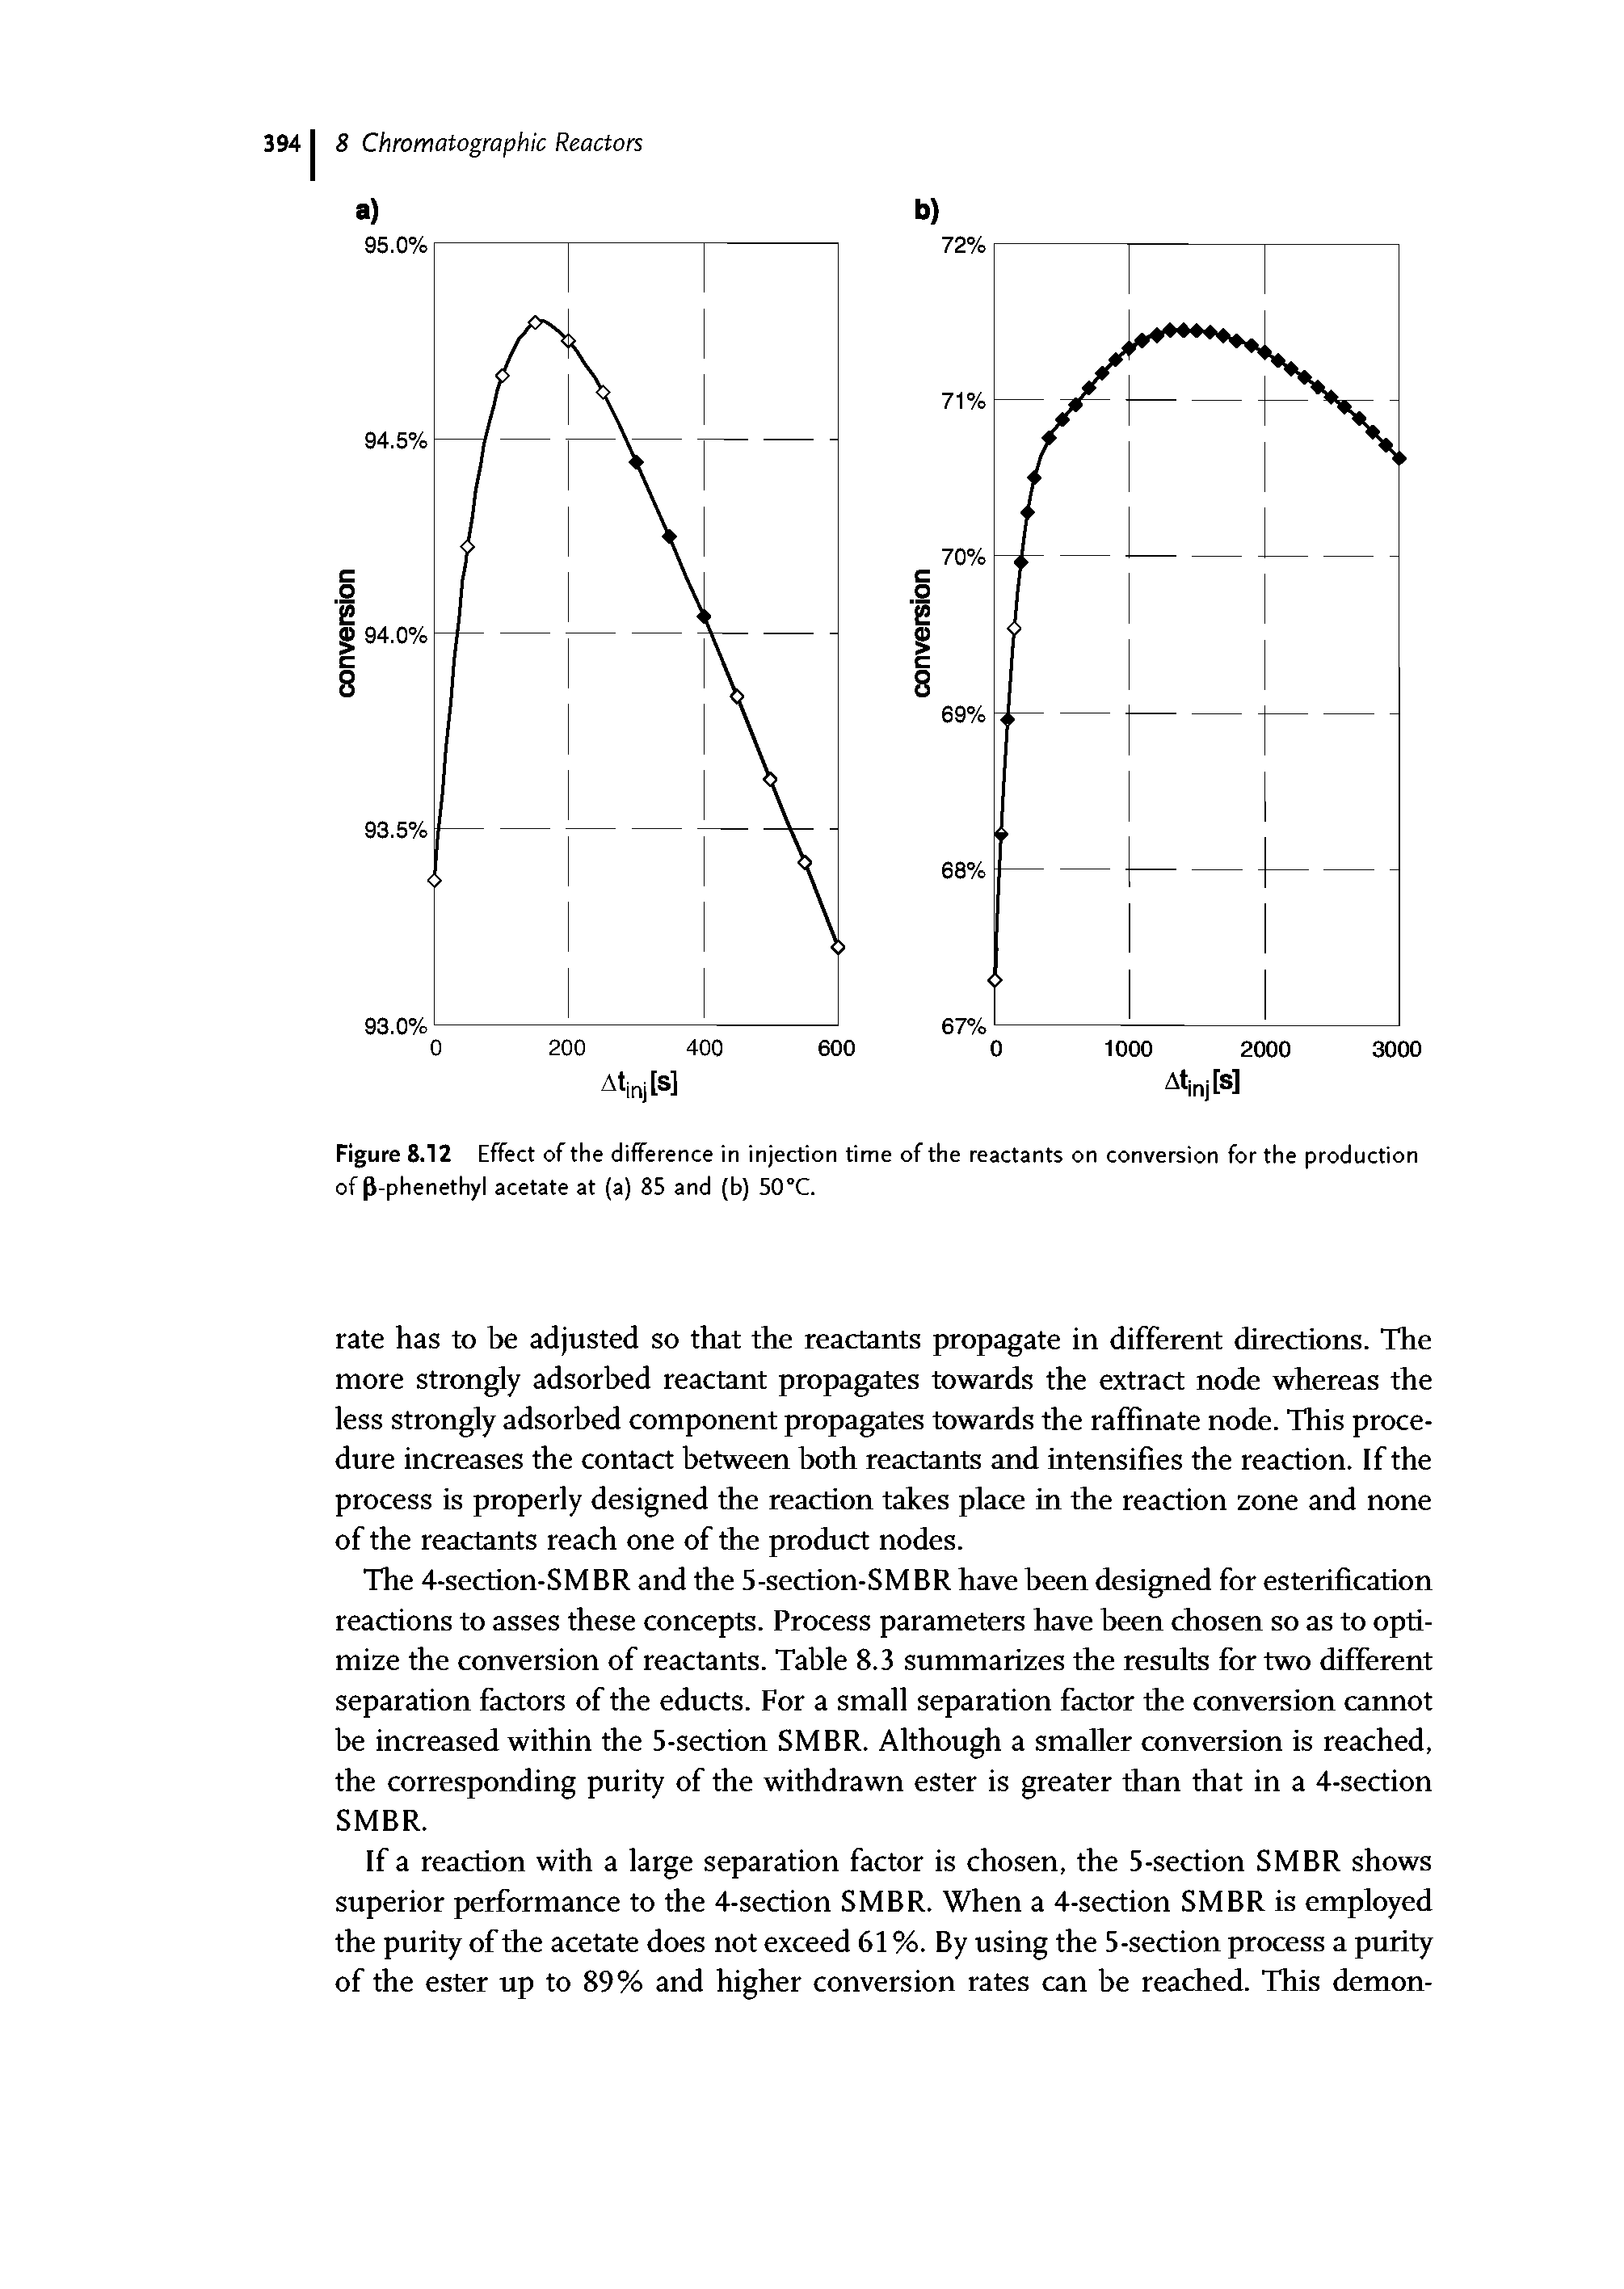 Figure 8.12 Effect of the difference in injection time of the reactants on conversion for the production of P-phenethyl acetate at (a) 85 and (b) 50°C.